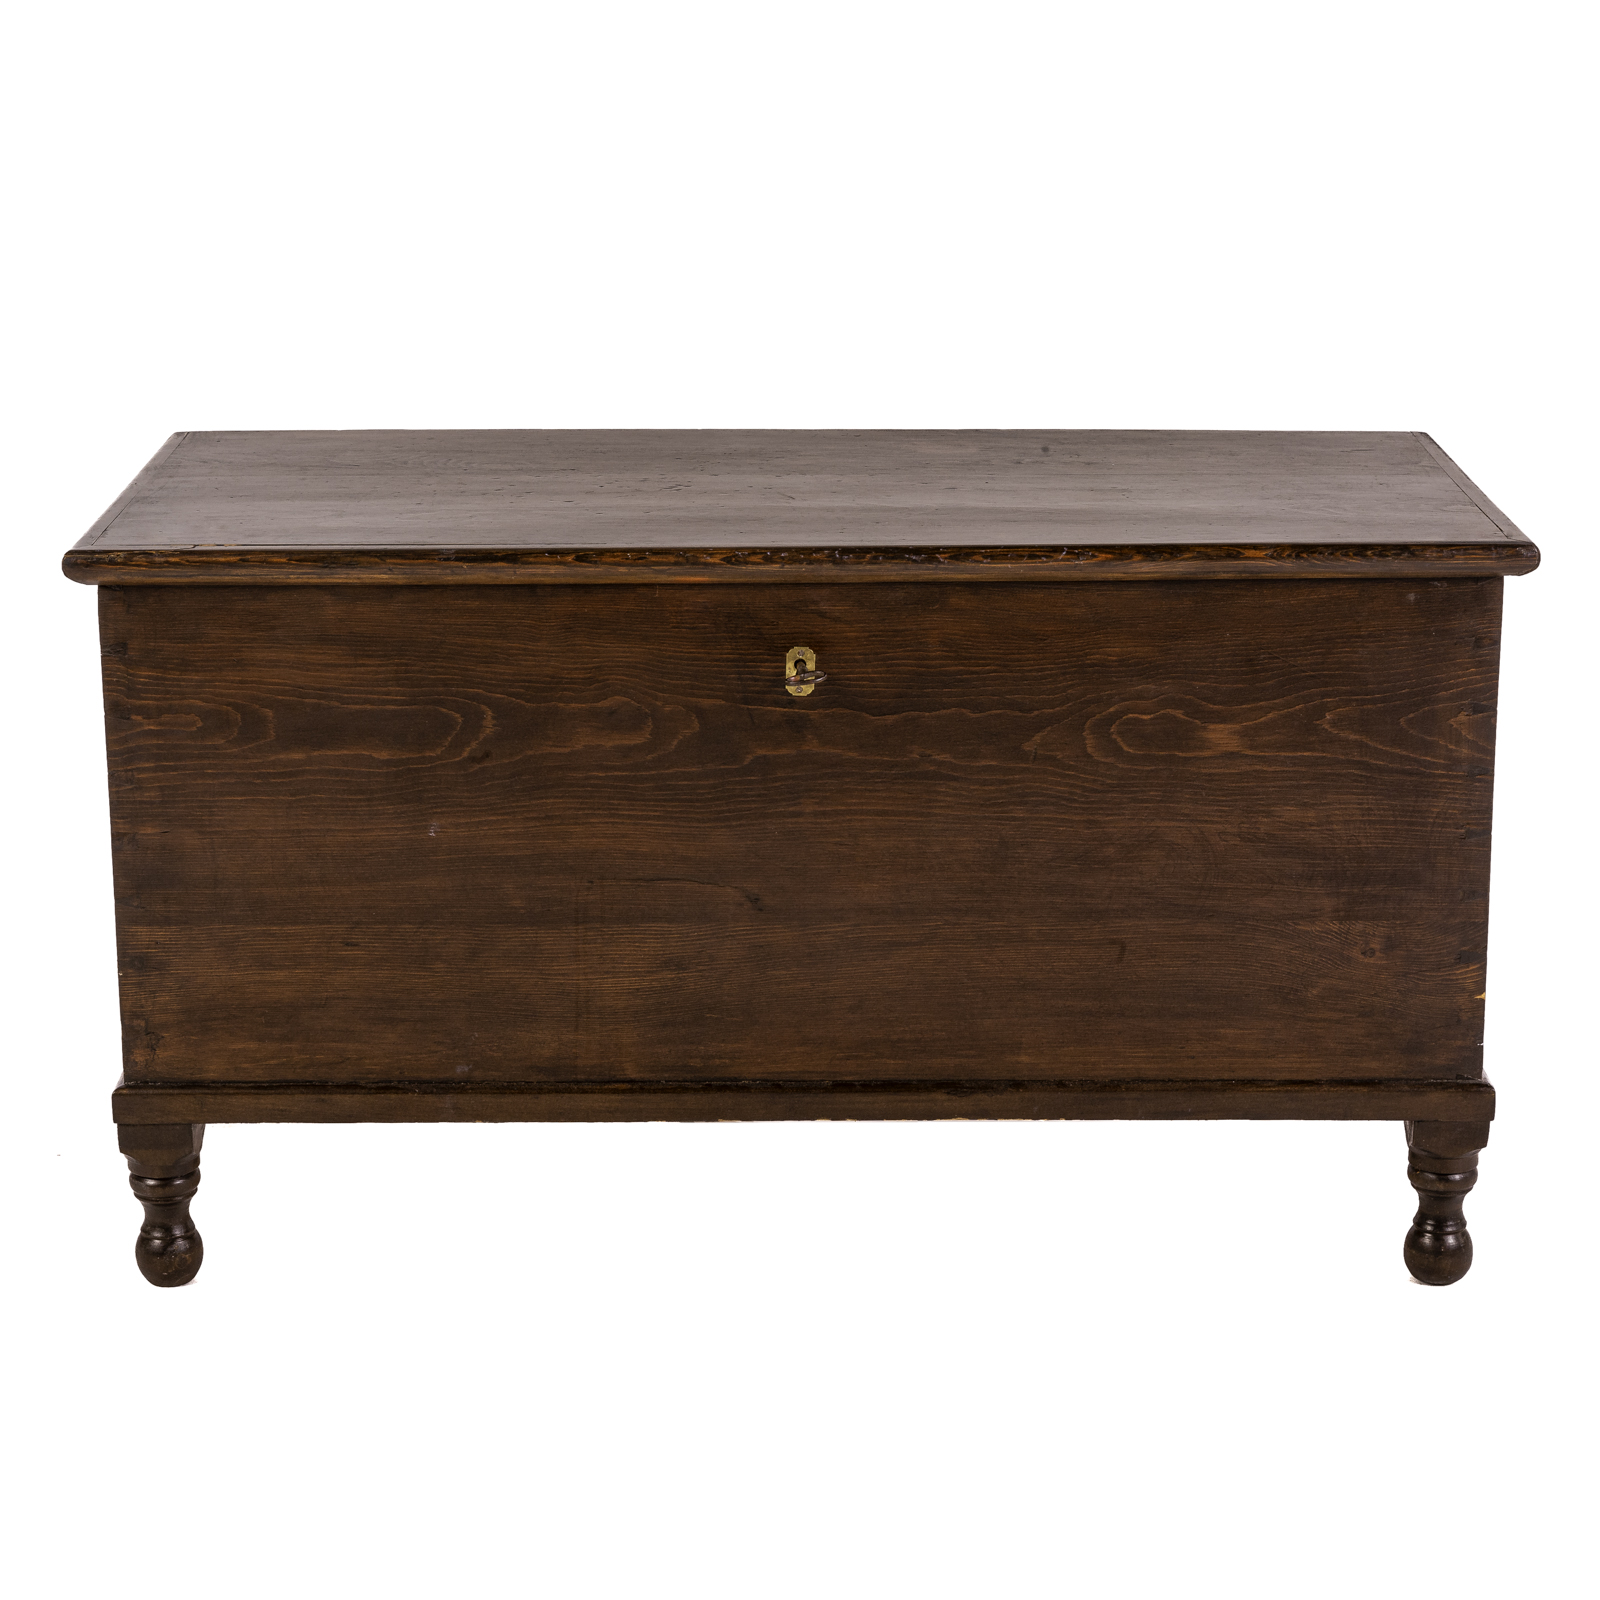 AMERICAN COUNTRY PINE BLANKET CHEST 33879c